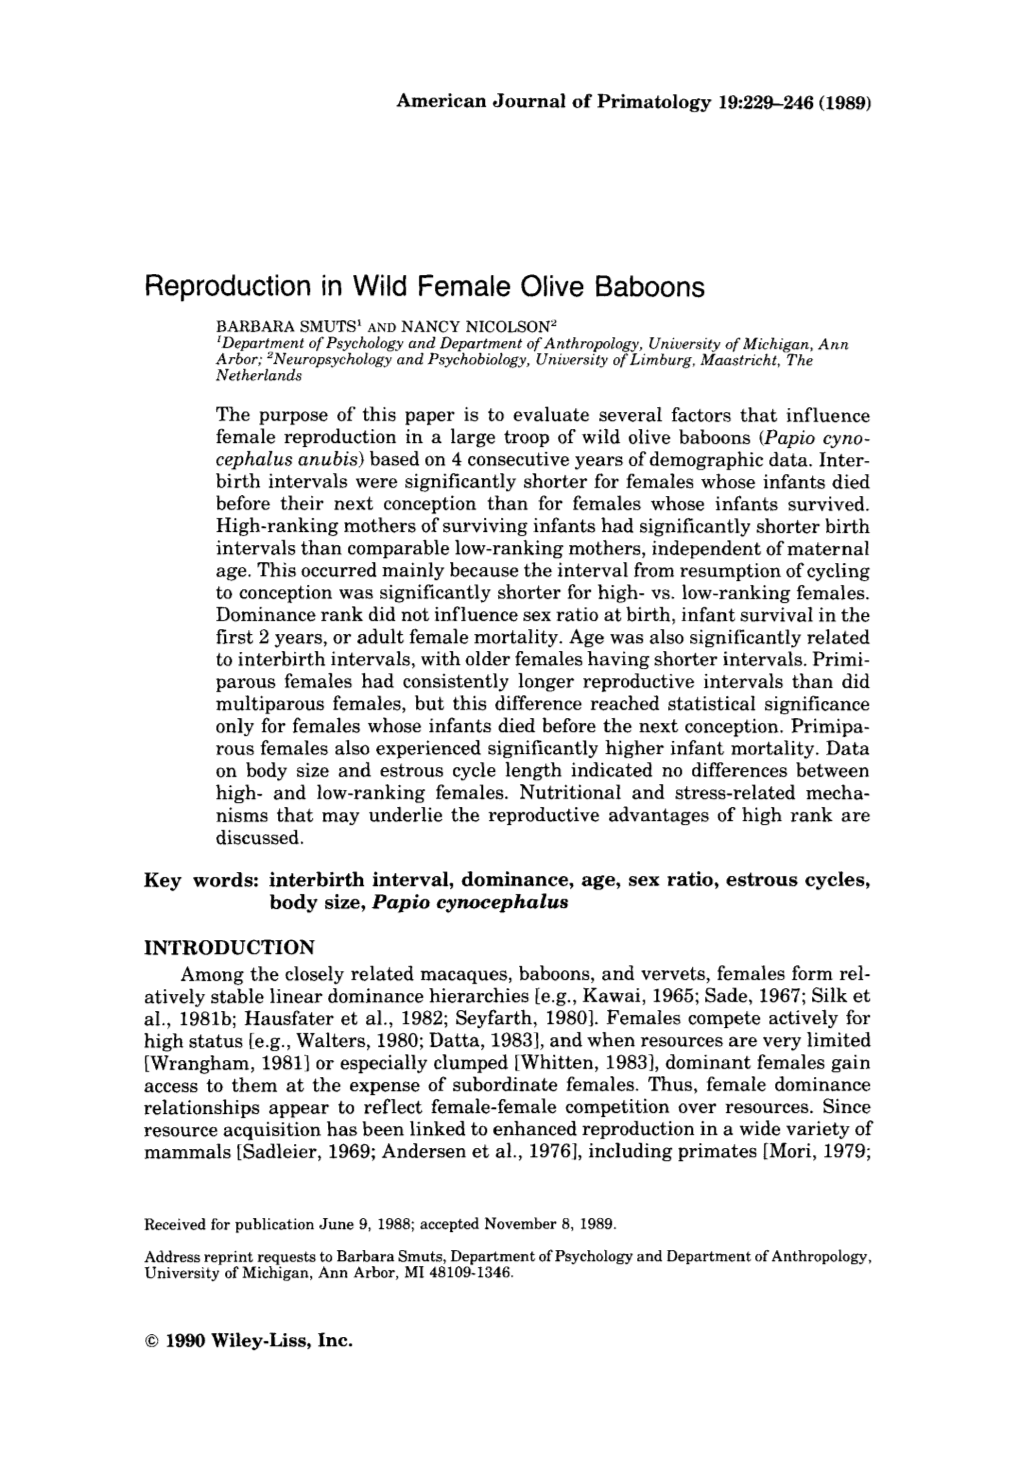 Reproduction in Wild Female Olive Baboons